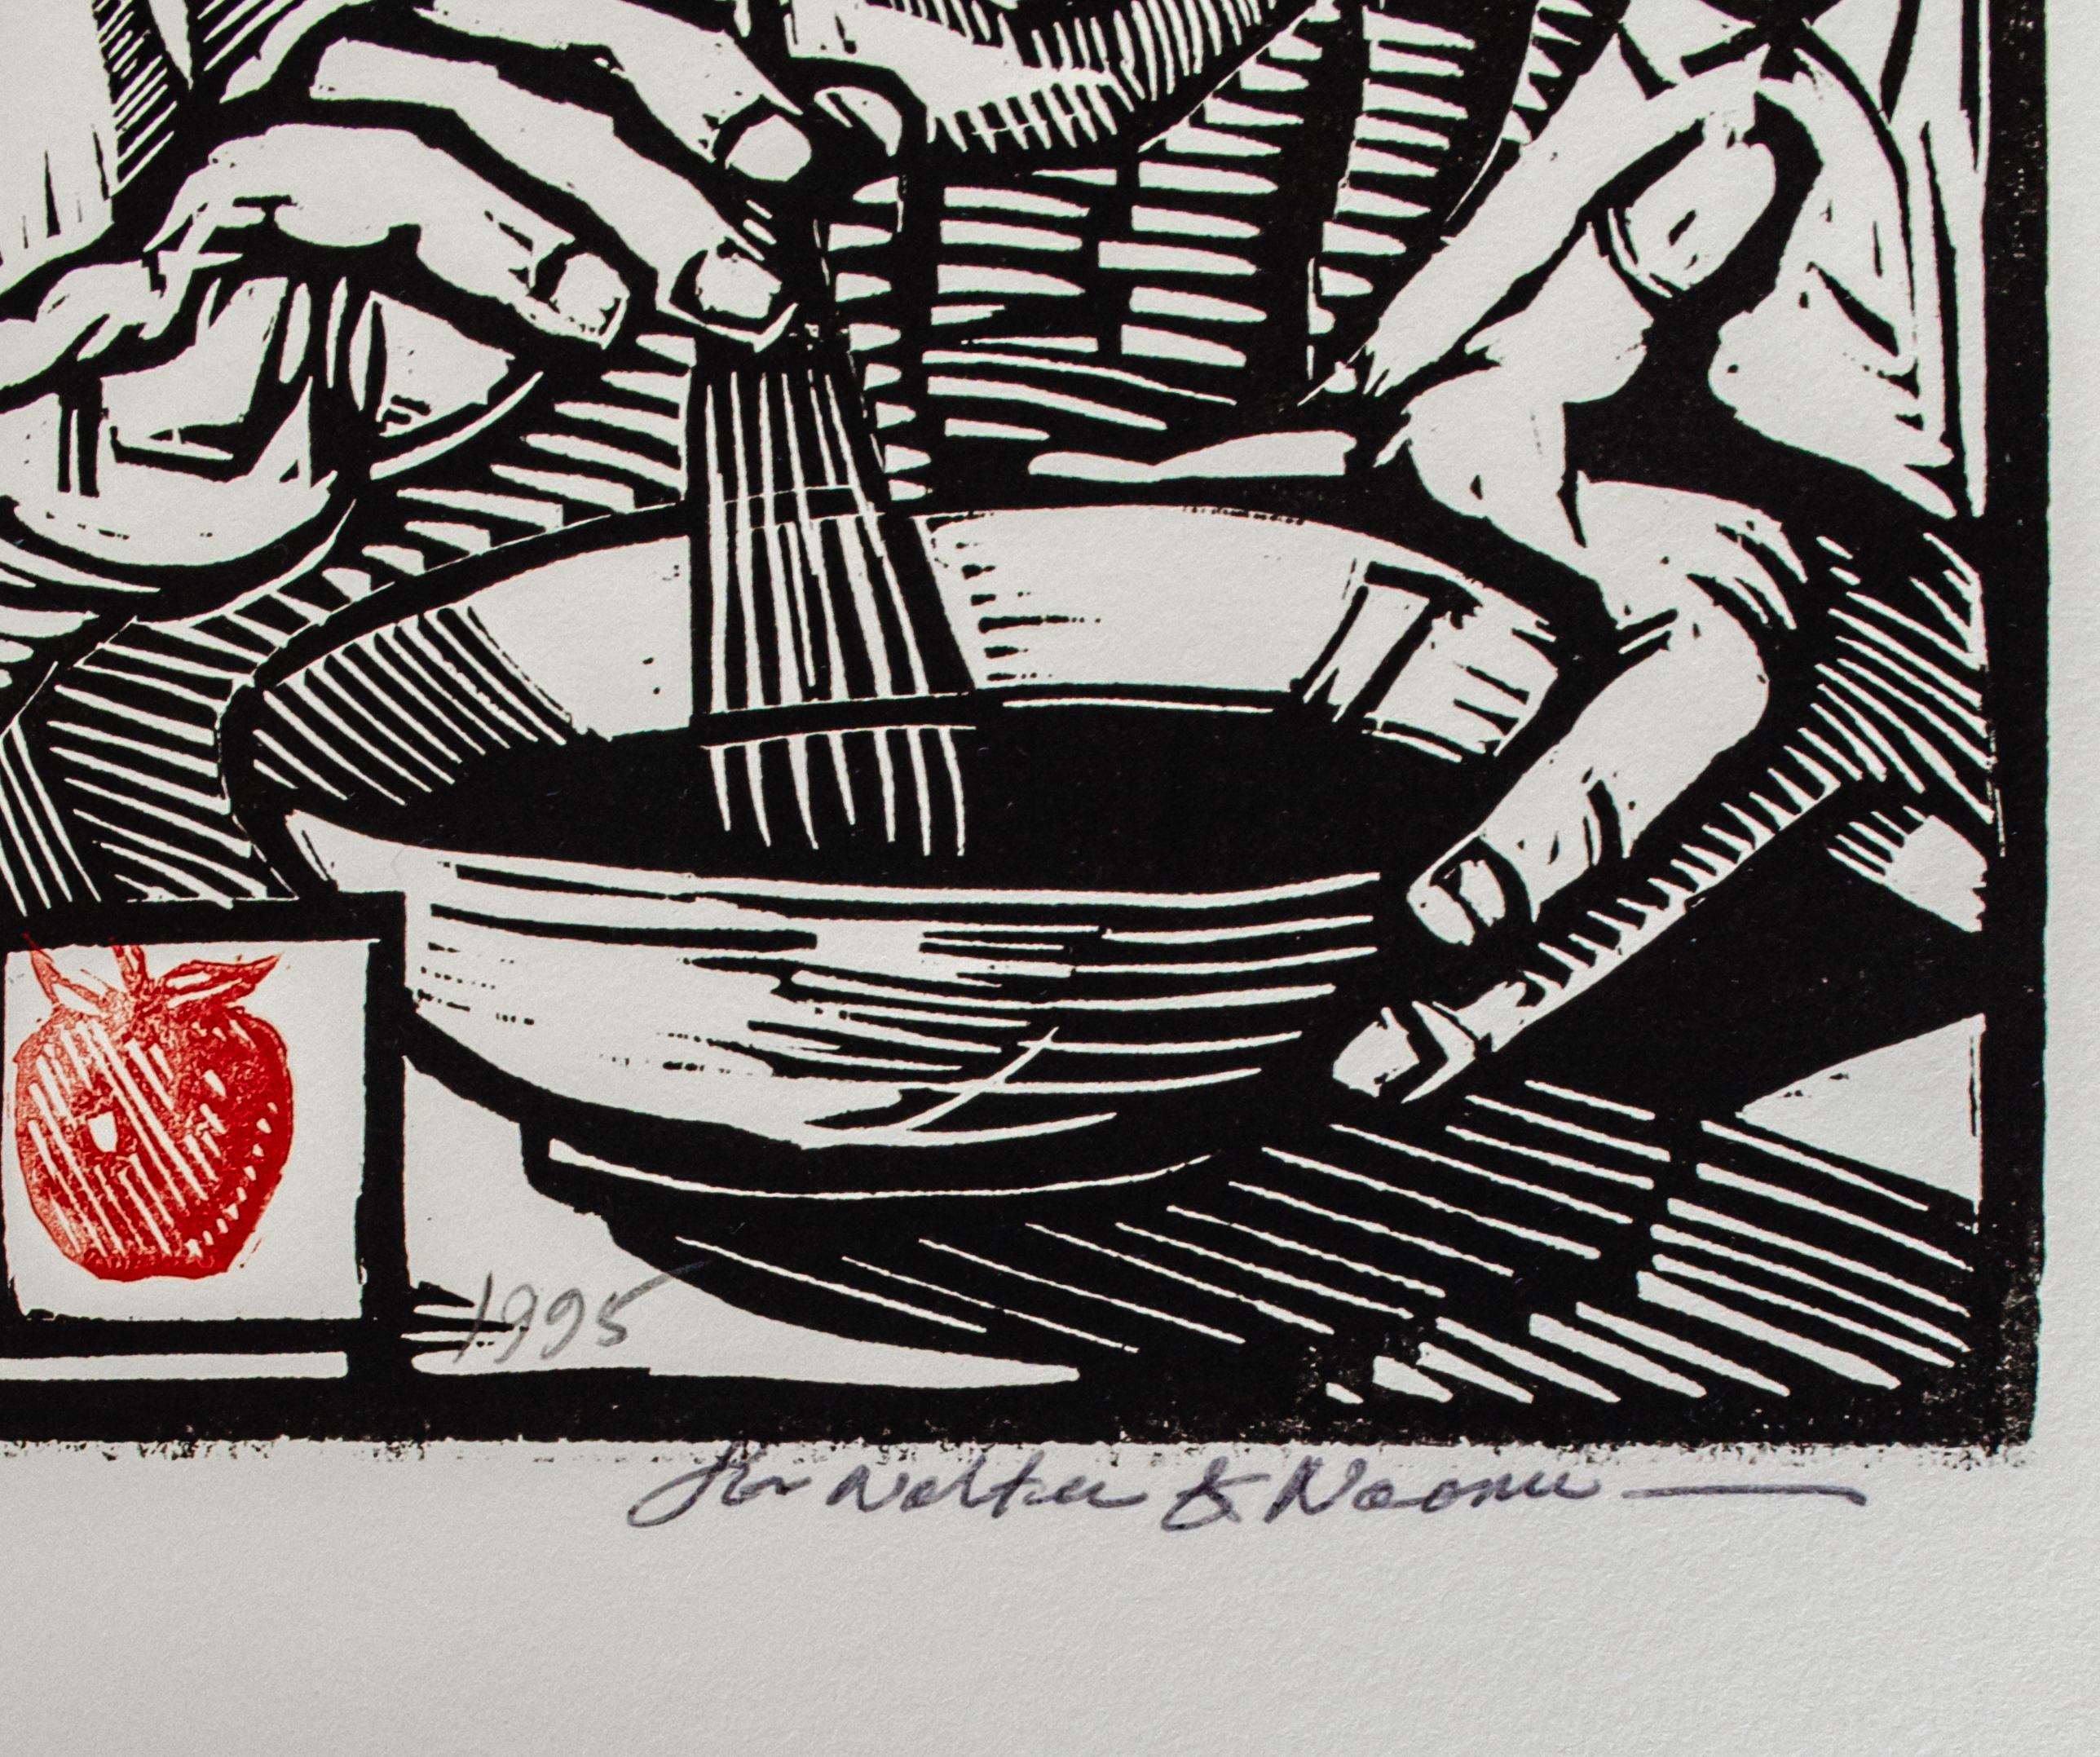 Tim Engelland (American, 1950-2012)
Untitled (Chefs in the Kitchen), 1995
Woodcut 
9 1/2 x 5 7/8 in.
Inscribed and dated bottom right: For Walter & Naomi, 1995
Signed and numbered top right: T. Engelland, 114/130

A lifelong artist, Engelland